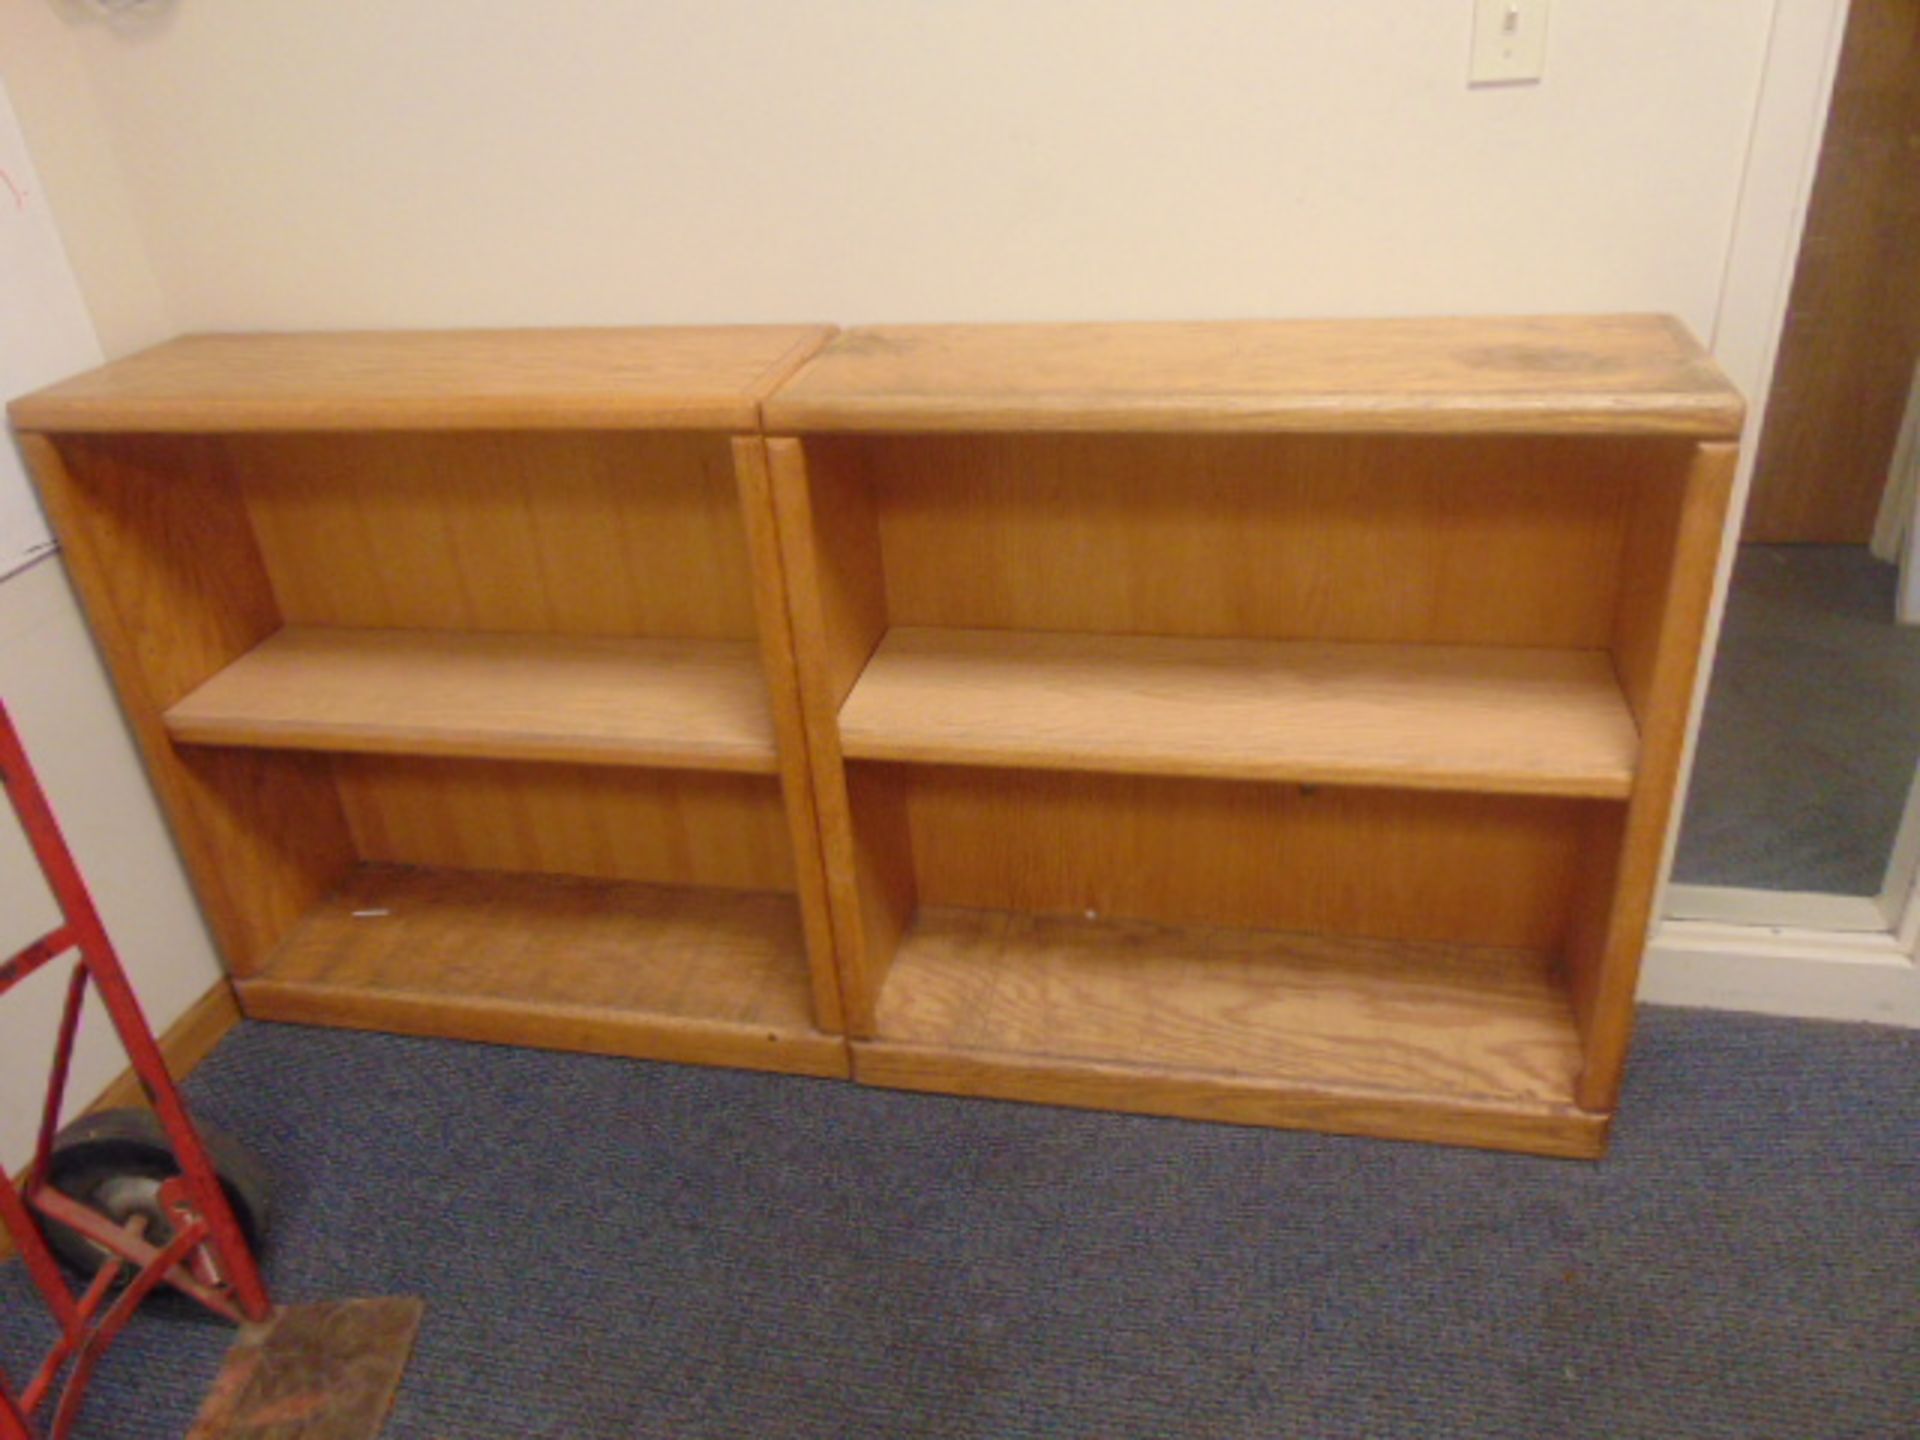 LOT CONSISTING OF DESK, (2) BOOK CASES & TABLE